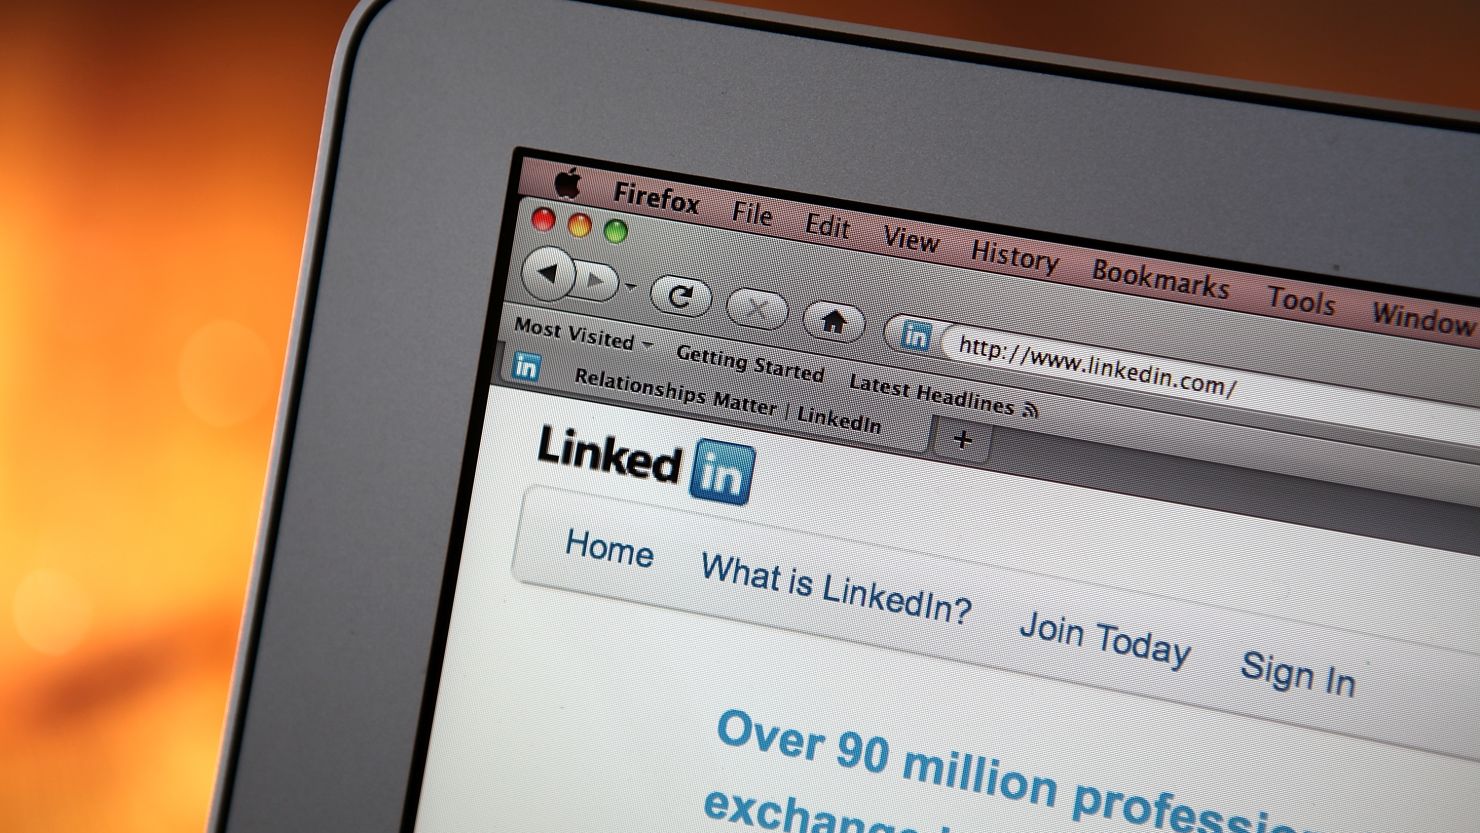 Ask newly former colleagues to write you recommendations on your LinkedIn profile.